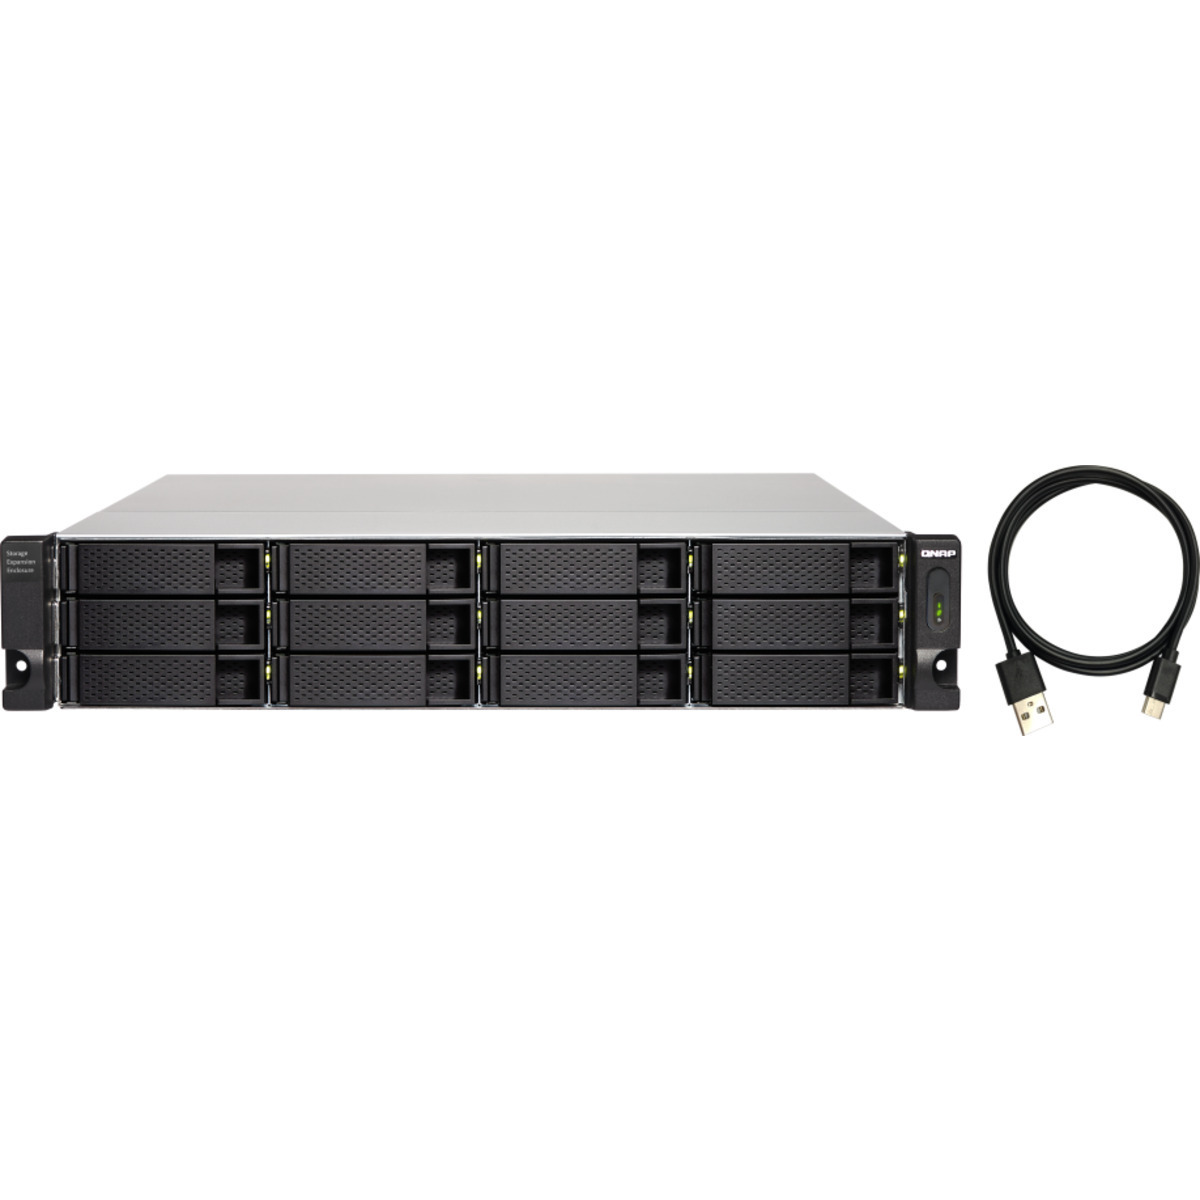 QNAP TL-R1200C-RP External Expansion Drive 32tb 12-Bay RackMount Multimedia / Power User / Business Expansion Enclosure 8x4tb Seagate BarraCuda ST4000DM004 3.5 7200rpm SATA 6Gb/s HDD CONSUMER Class Drives Installed - Burn-In Tested TL-R1200C-RP External Expansion Drive